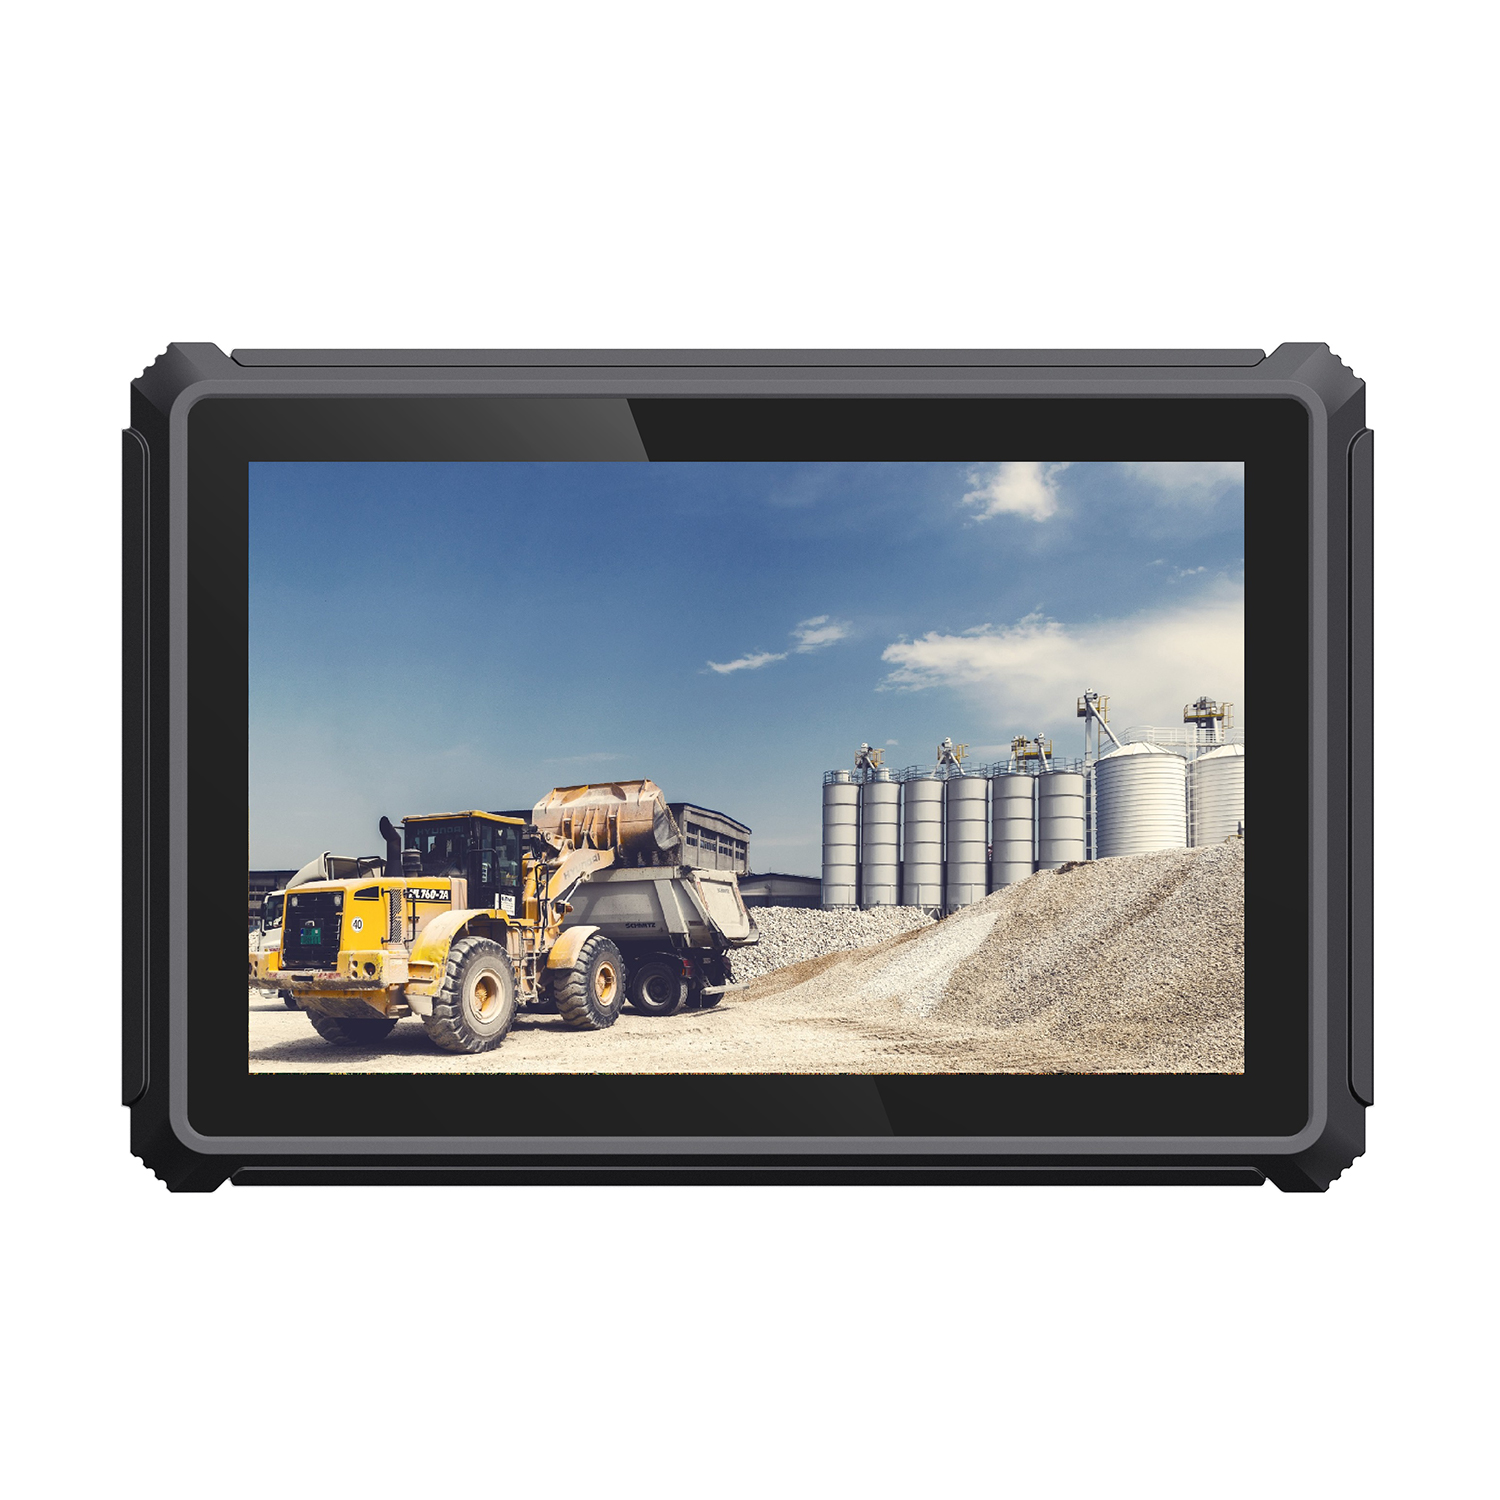 Waterproof 10.1inch heavy duty LCD monitor Android 10.0 online VD-PMT10 with touch screen for tractors, harvesters, construction trucks, vehicles